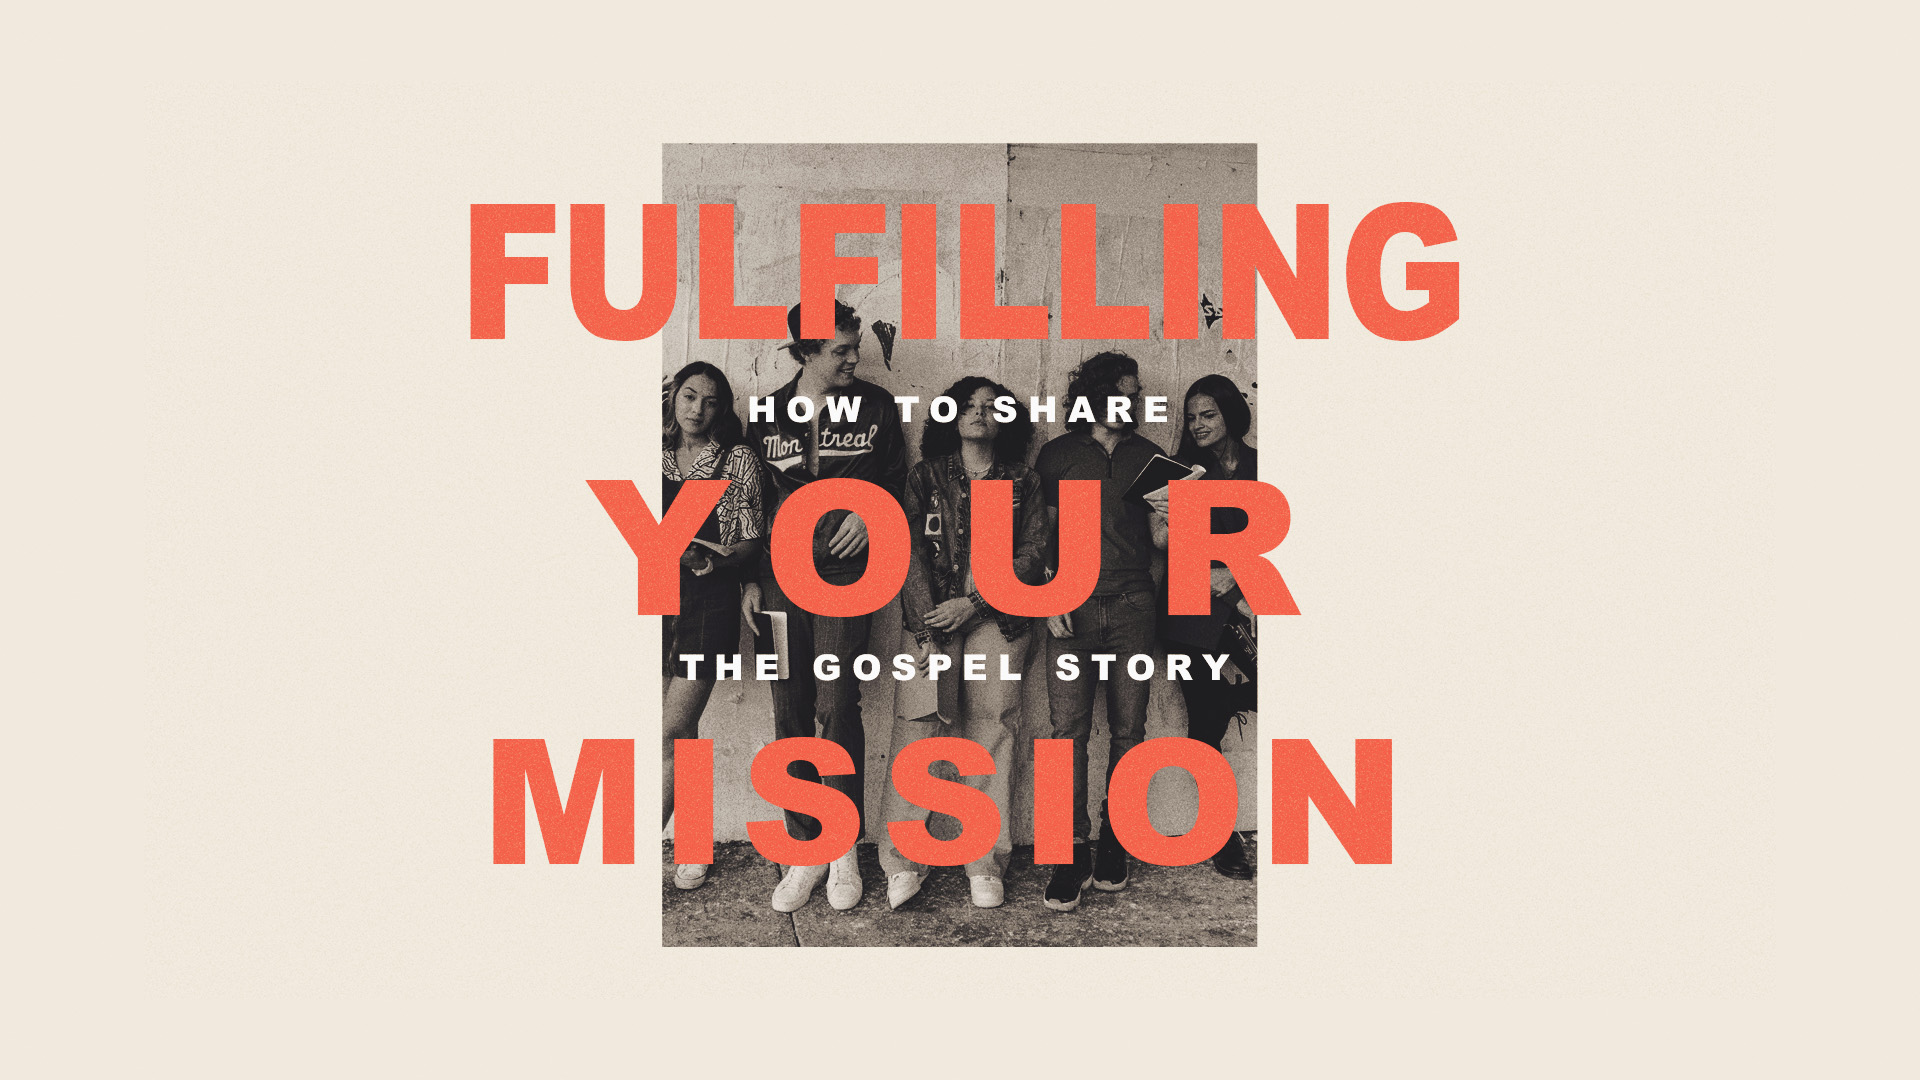 Fulfilling Your Mission: How To Share The Gospel Story

Next Session To Be Determined
